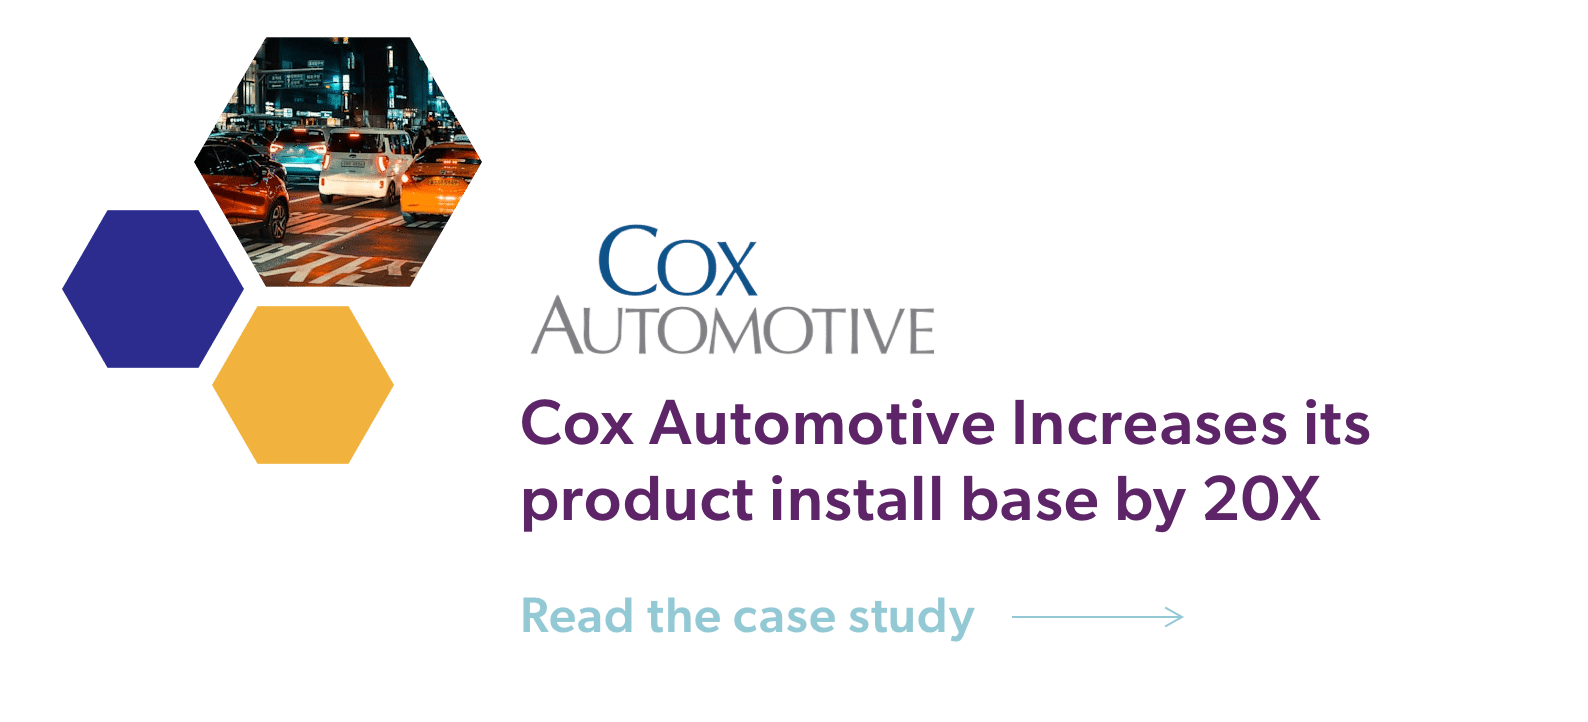 Jobs-to-be-Done Example Cox Automotive